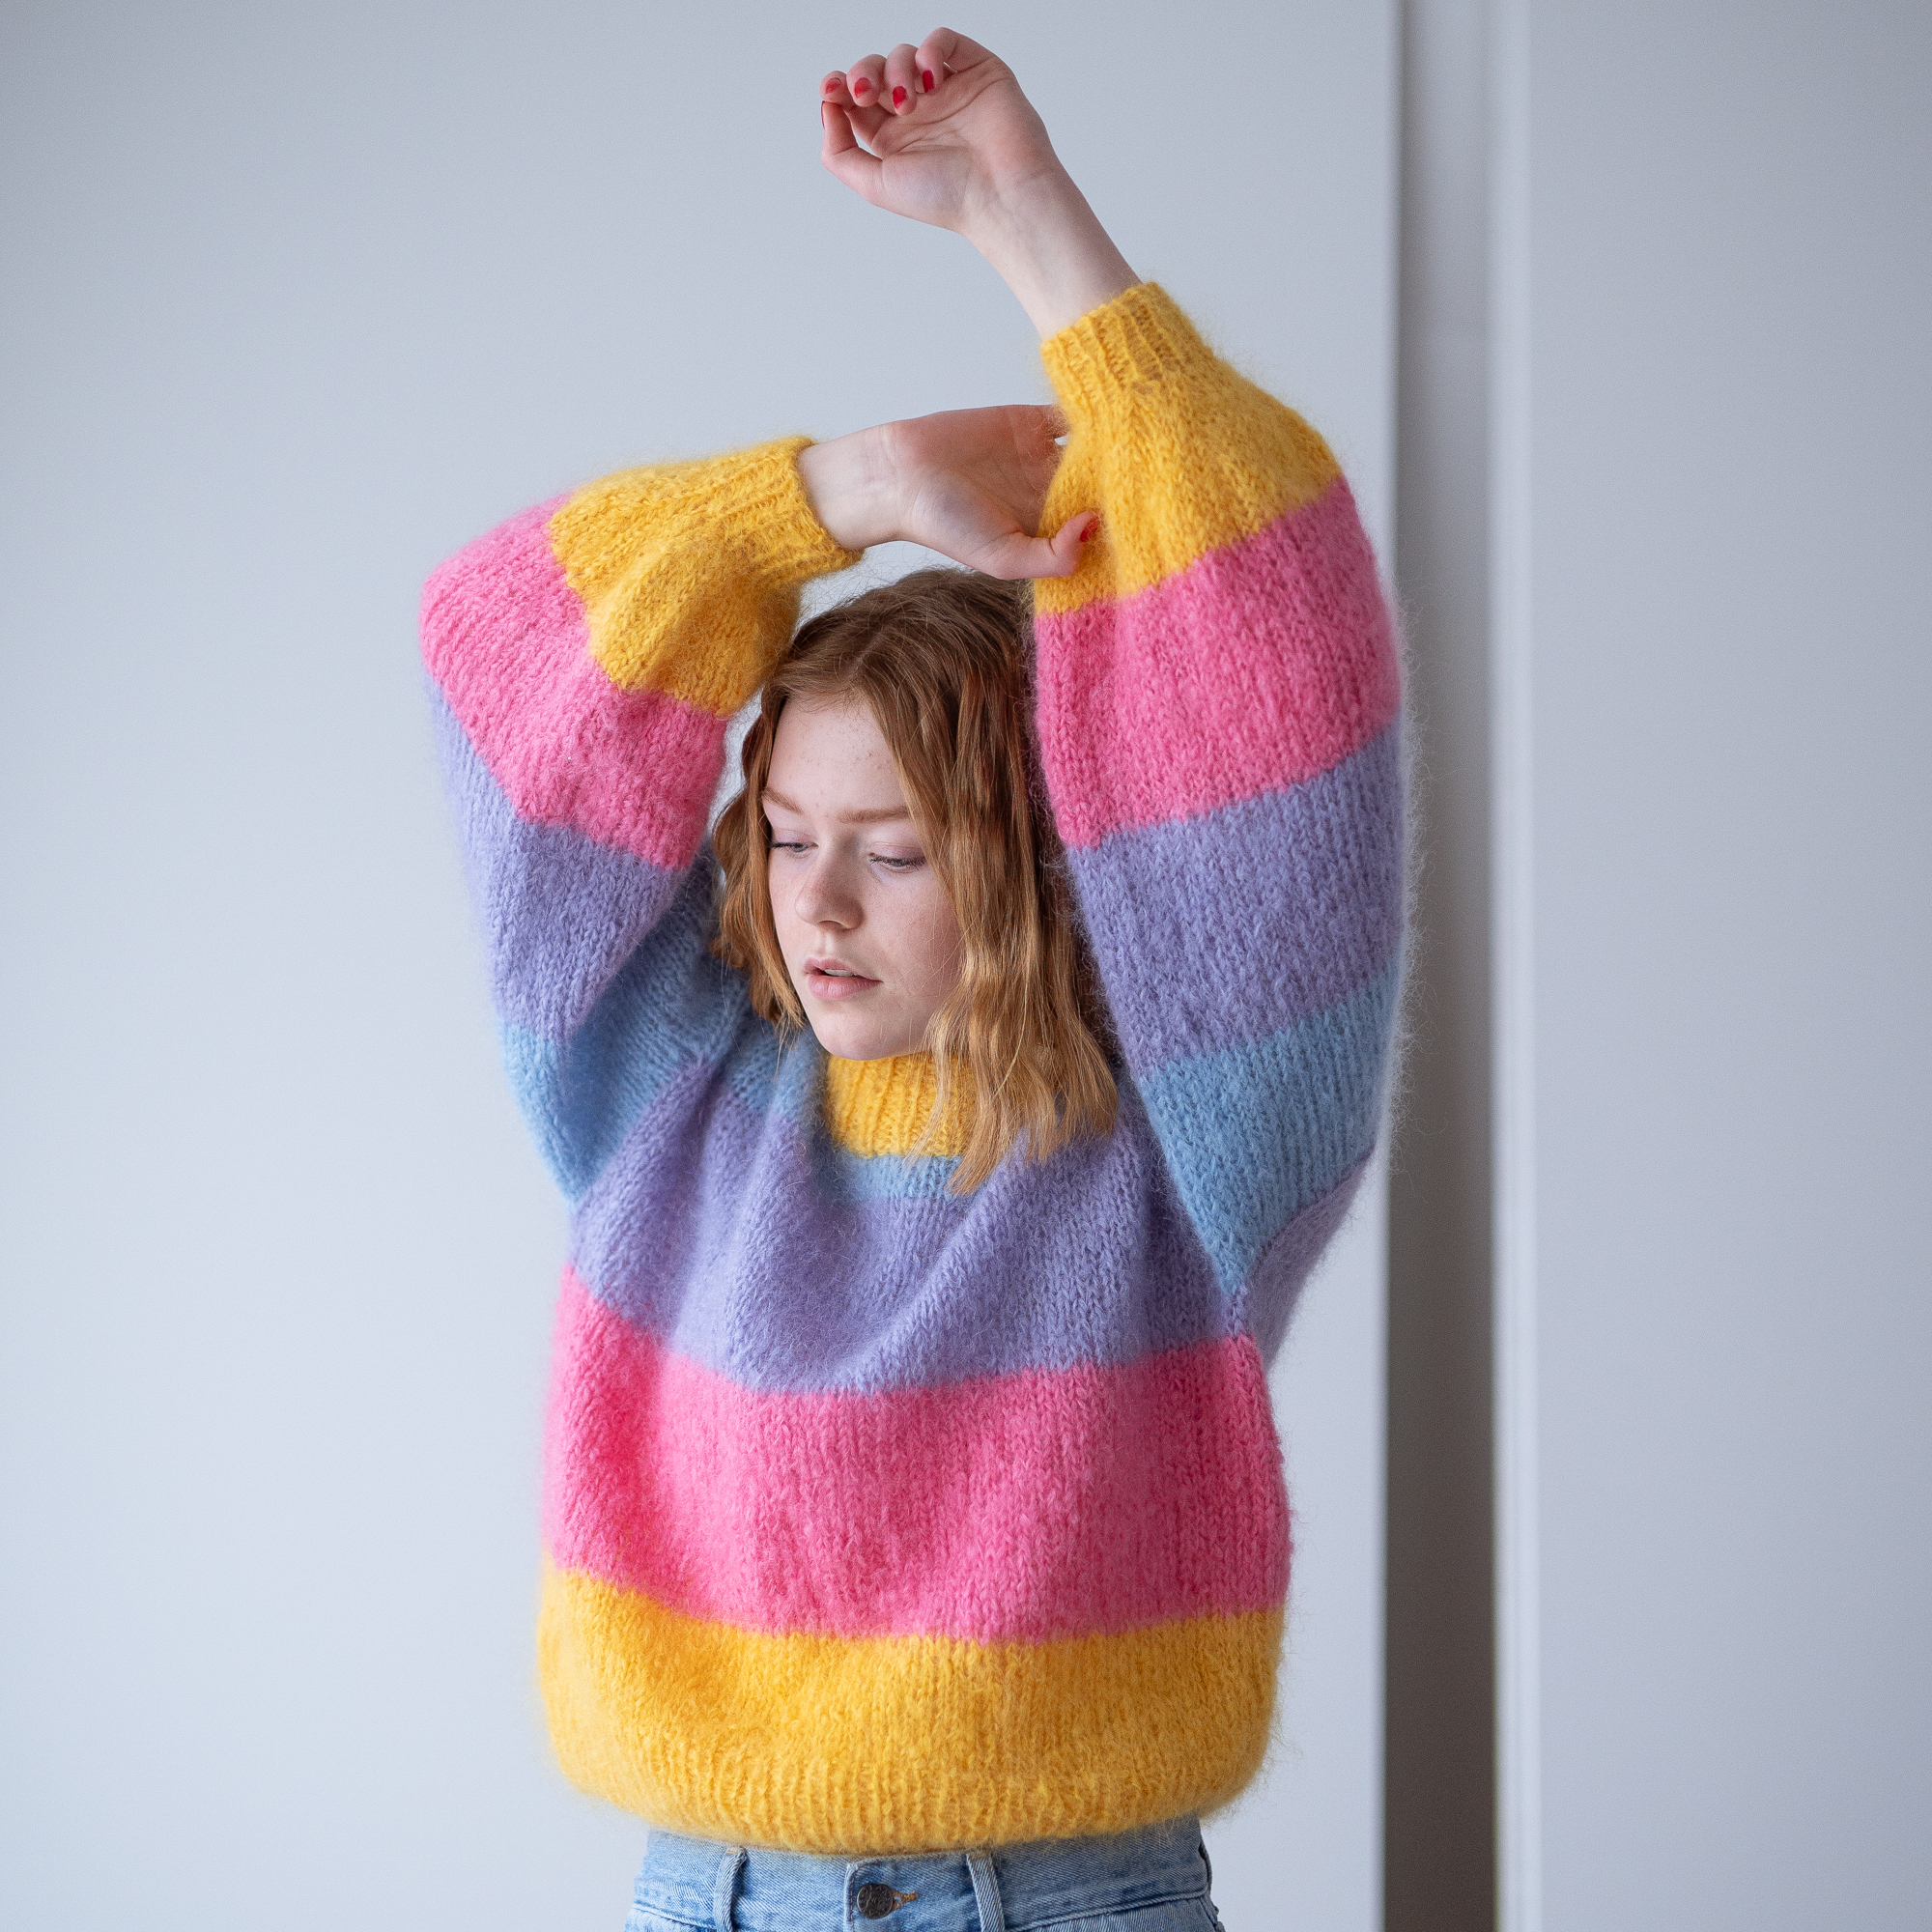  - Chacha sweater | Fluffy mohair sweater | Knitting pattern- by HipKnitShop - 26/03/2021